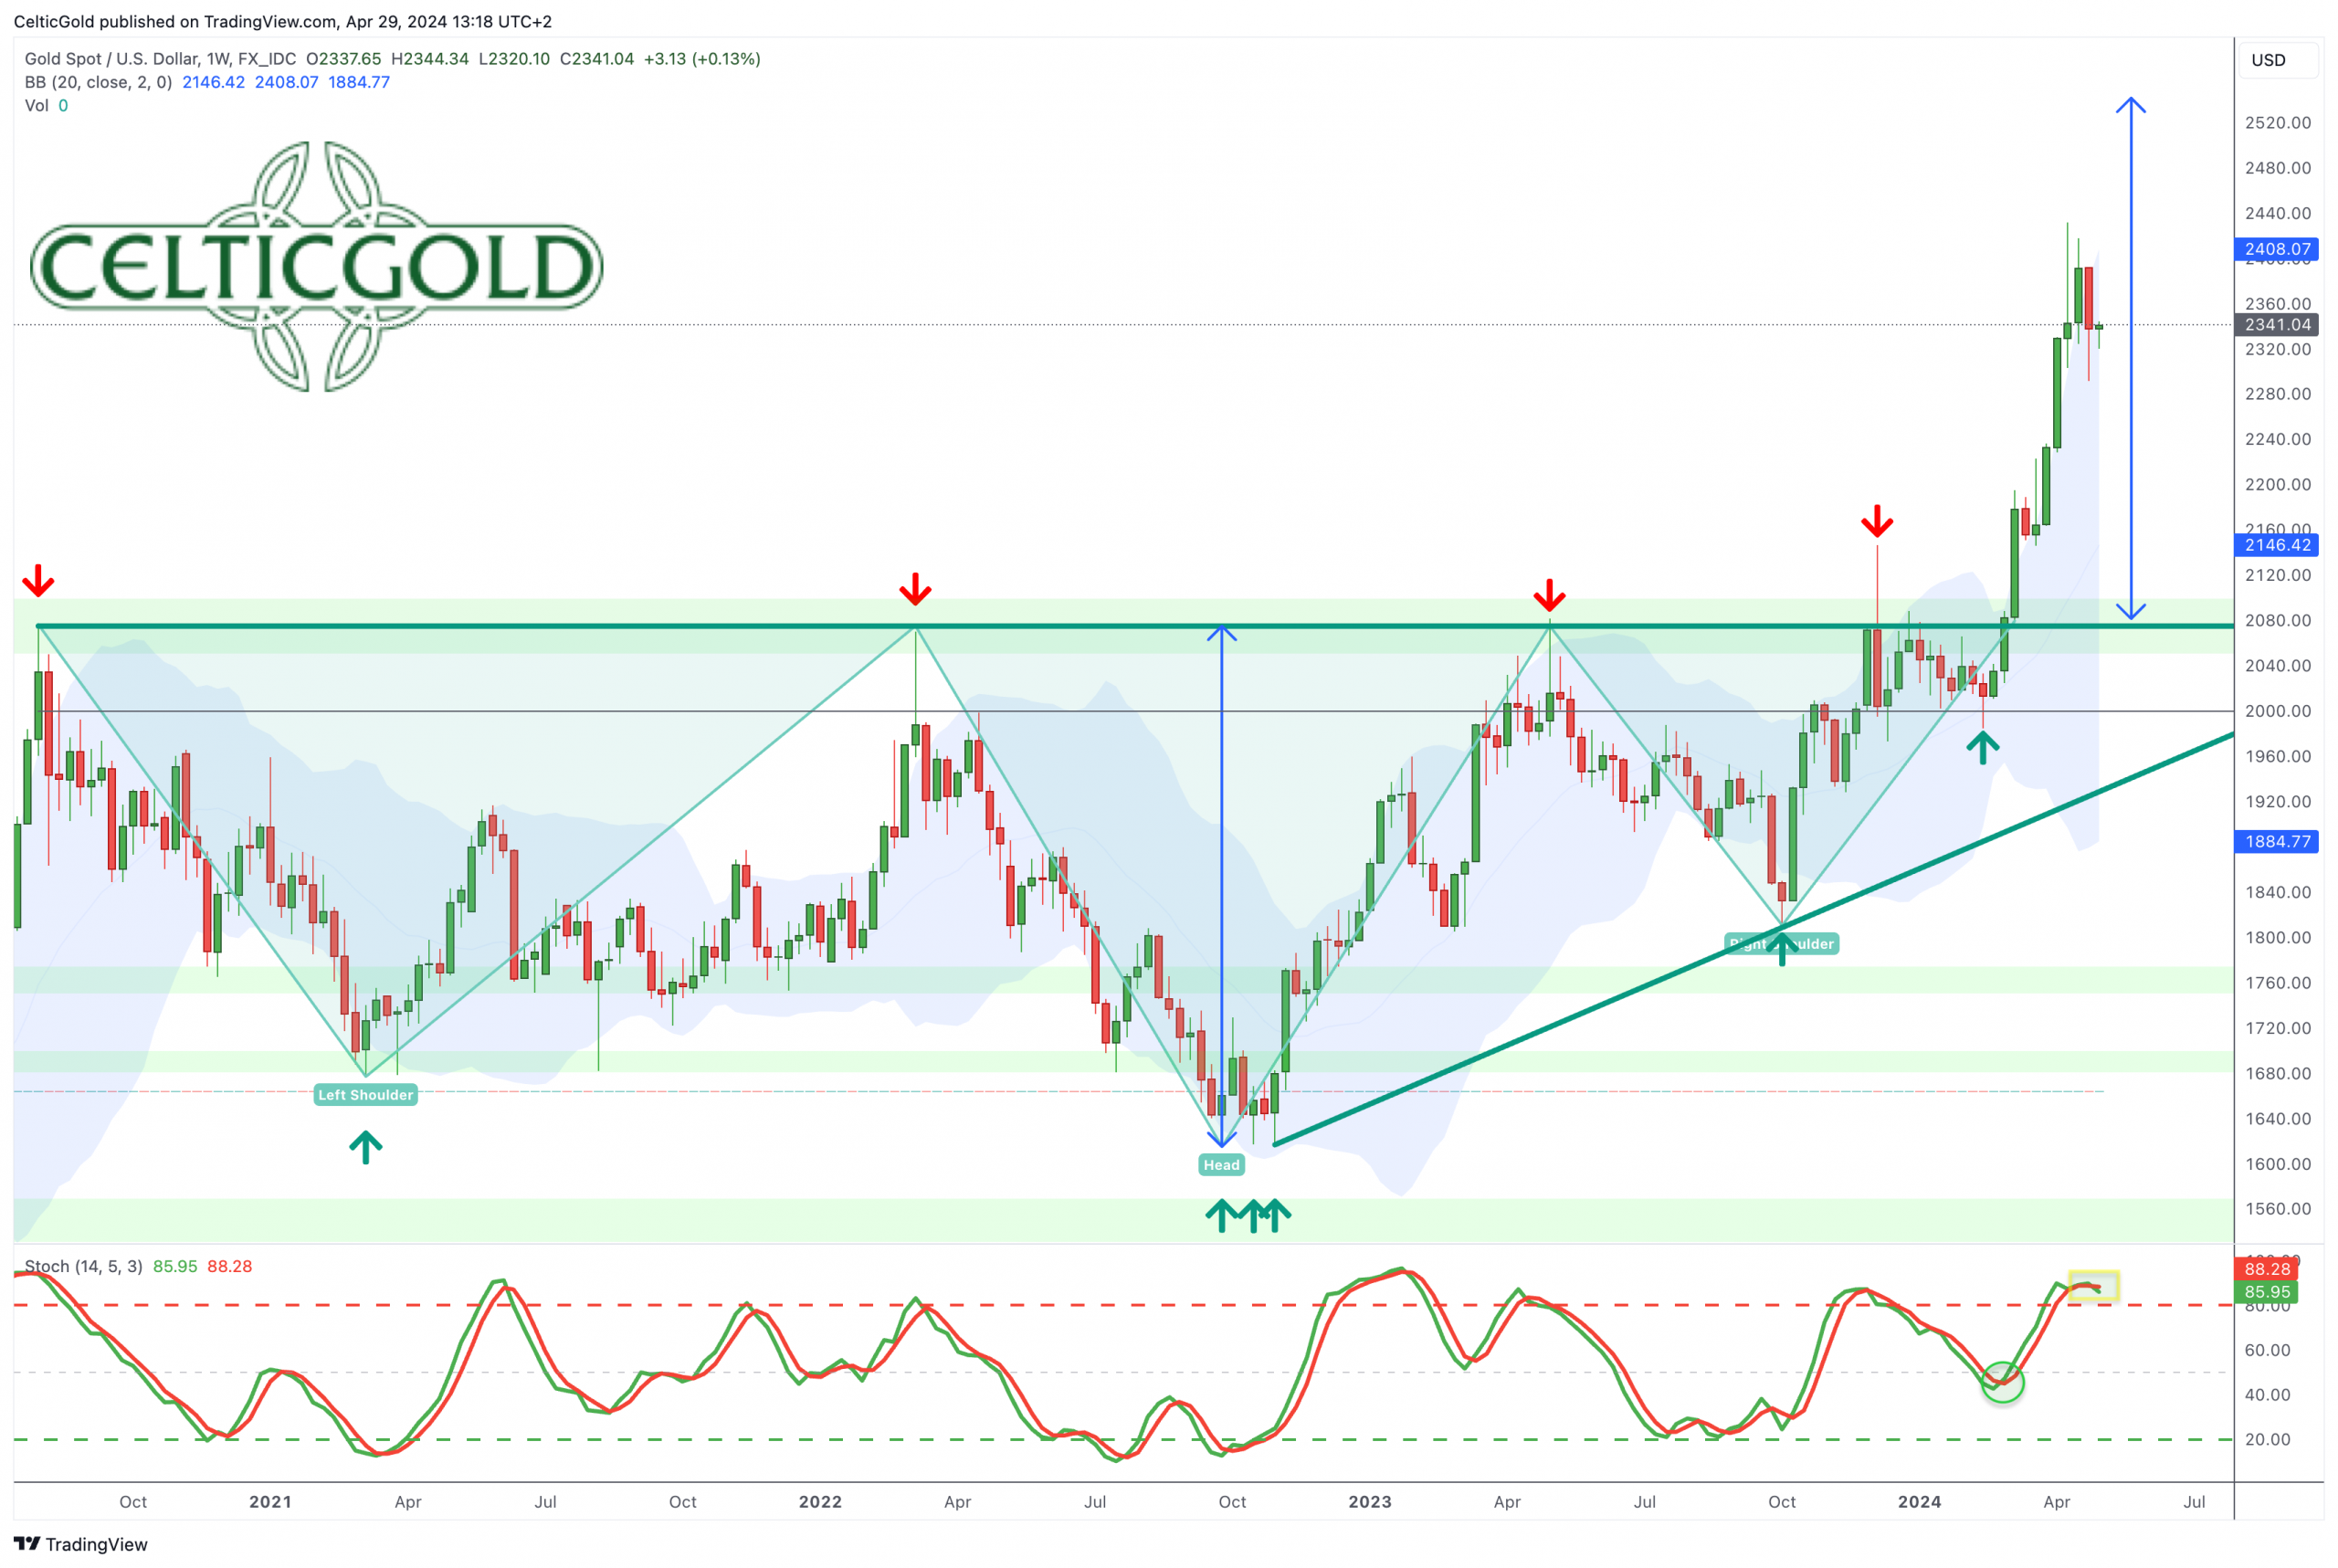 Gold in US-Dollar, weekly chart as of April 29th, 2024. Source: Tradingview. April 29th, 2024, Gold - Consolidation triangle rather suggests continuation of the rally